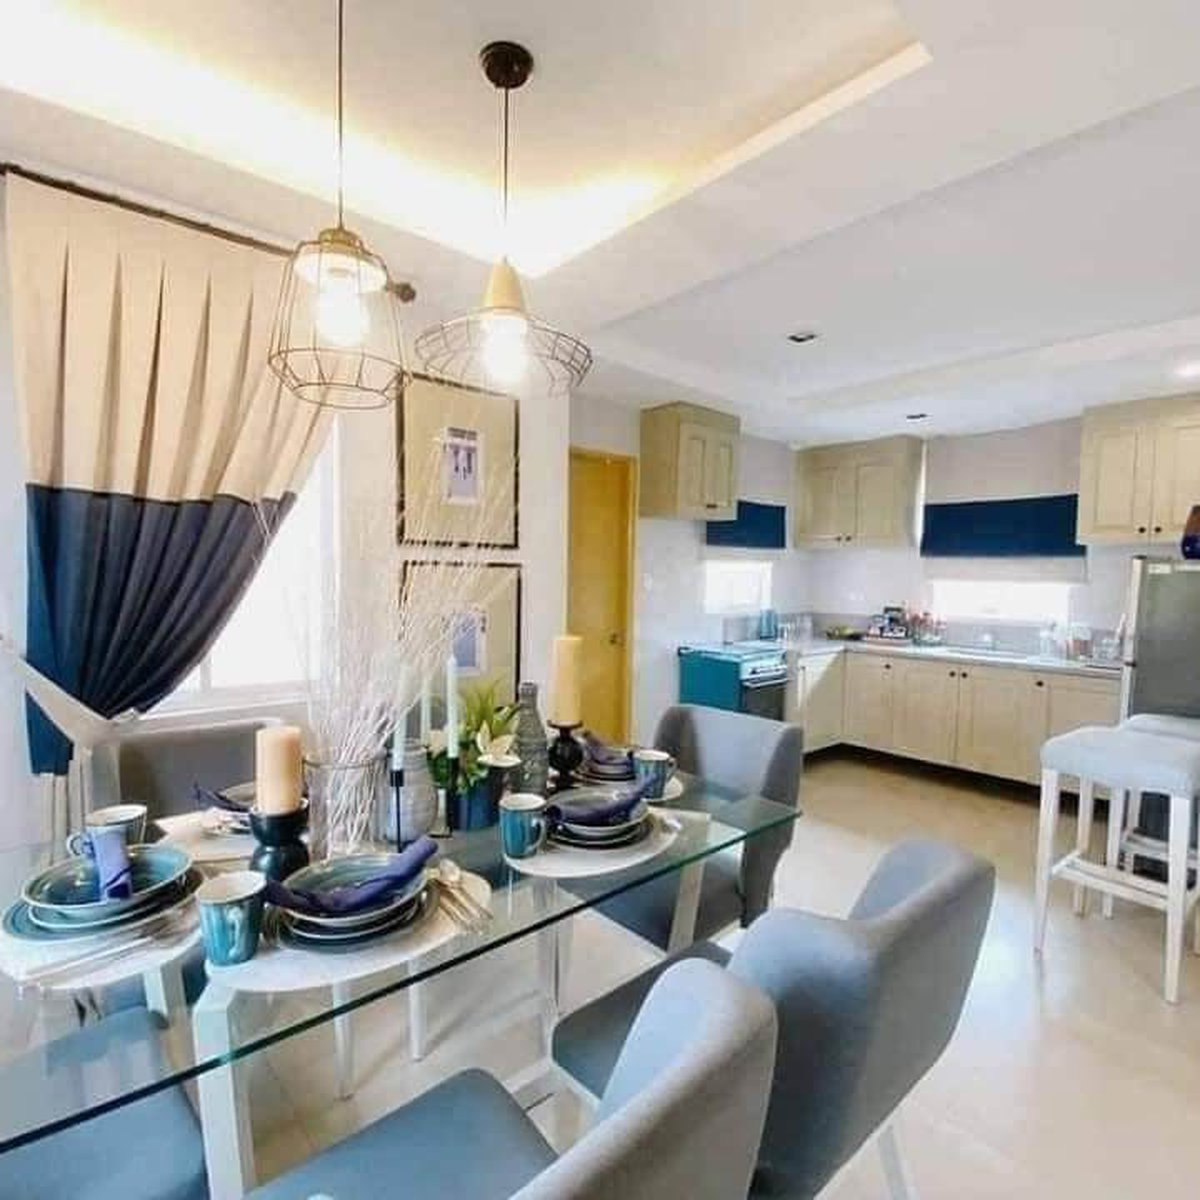 4 Bedroom Single Attached House for Sale in Alfonso, Cavite